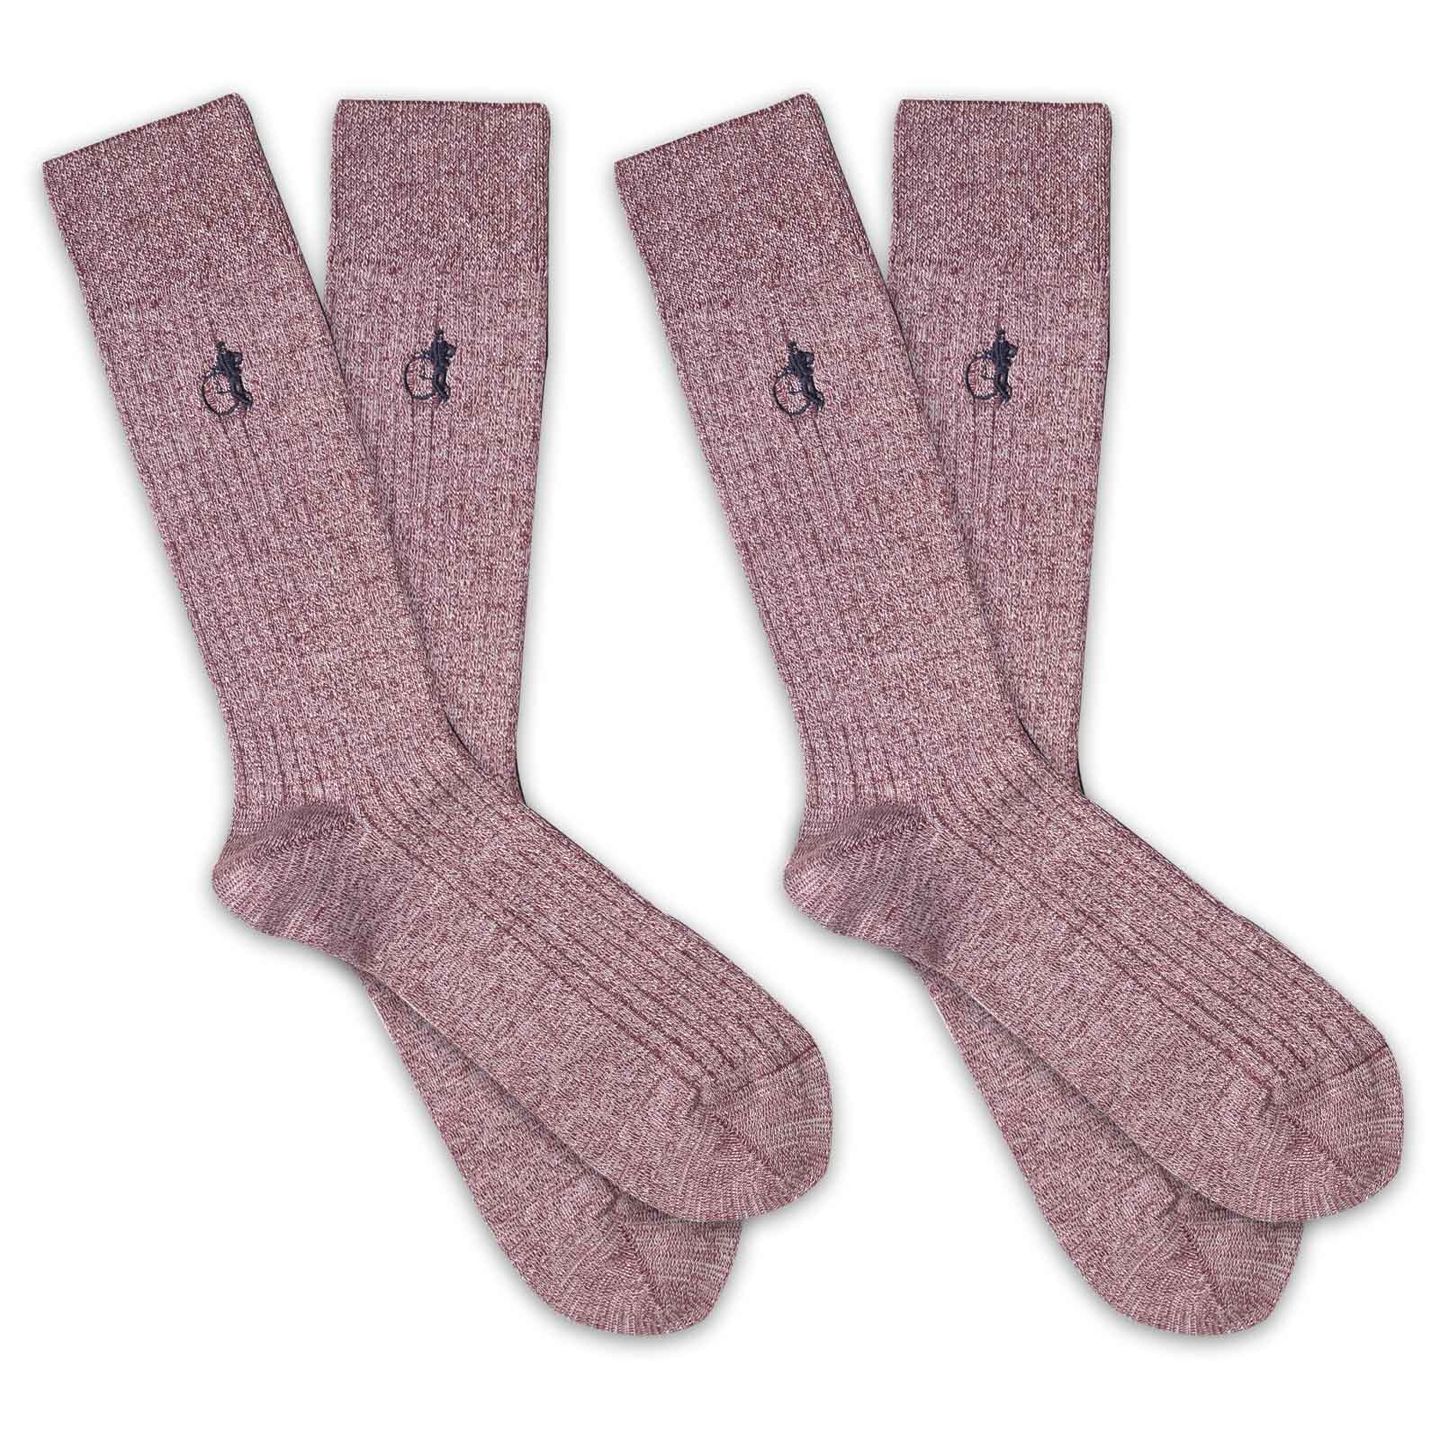 2 pair of pink socks with a white background